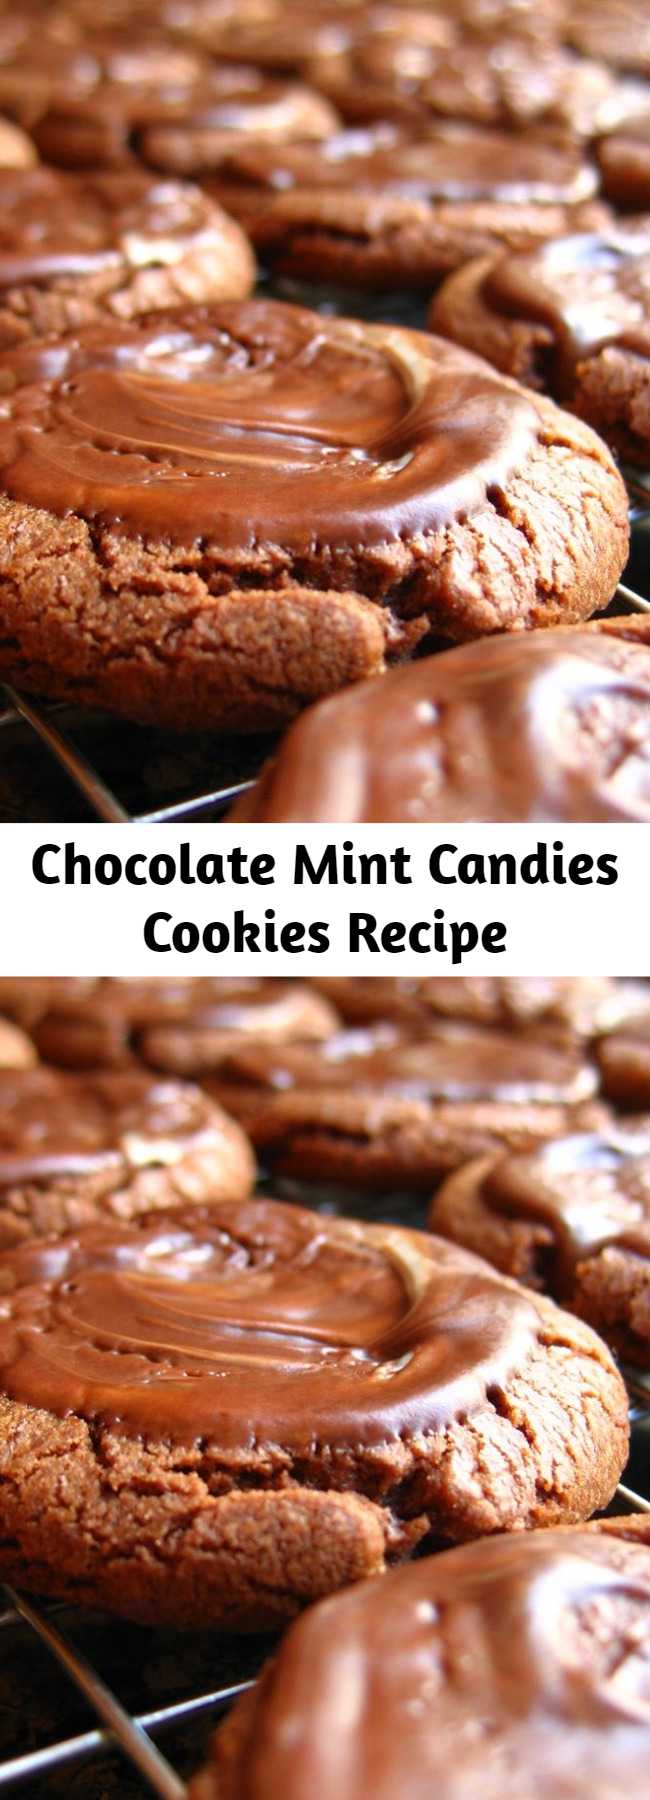 Chocolate Mint Candies Cookies Recipe - I received this recipe through a cookie exchange years ago, and it has become a favorite of family and friends.